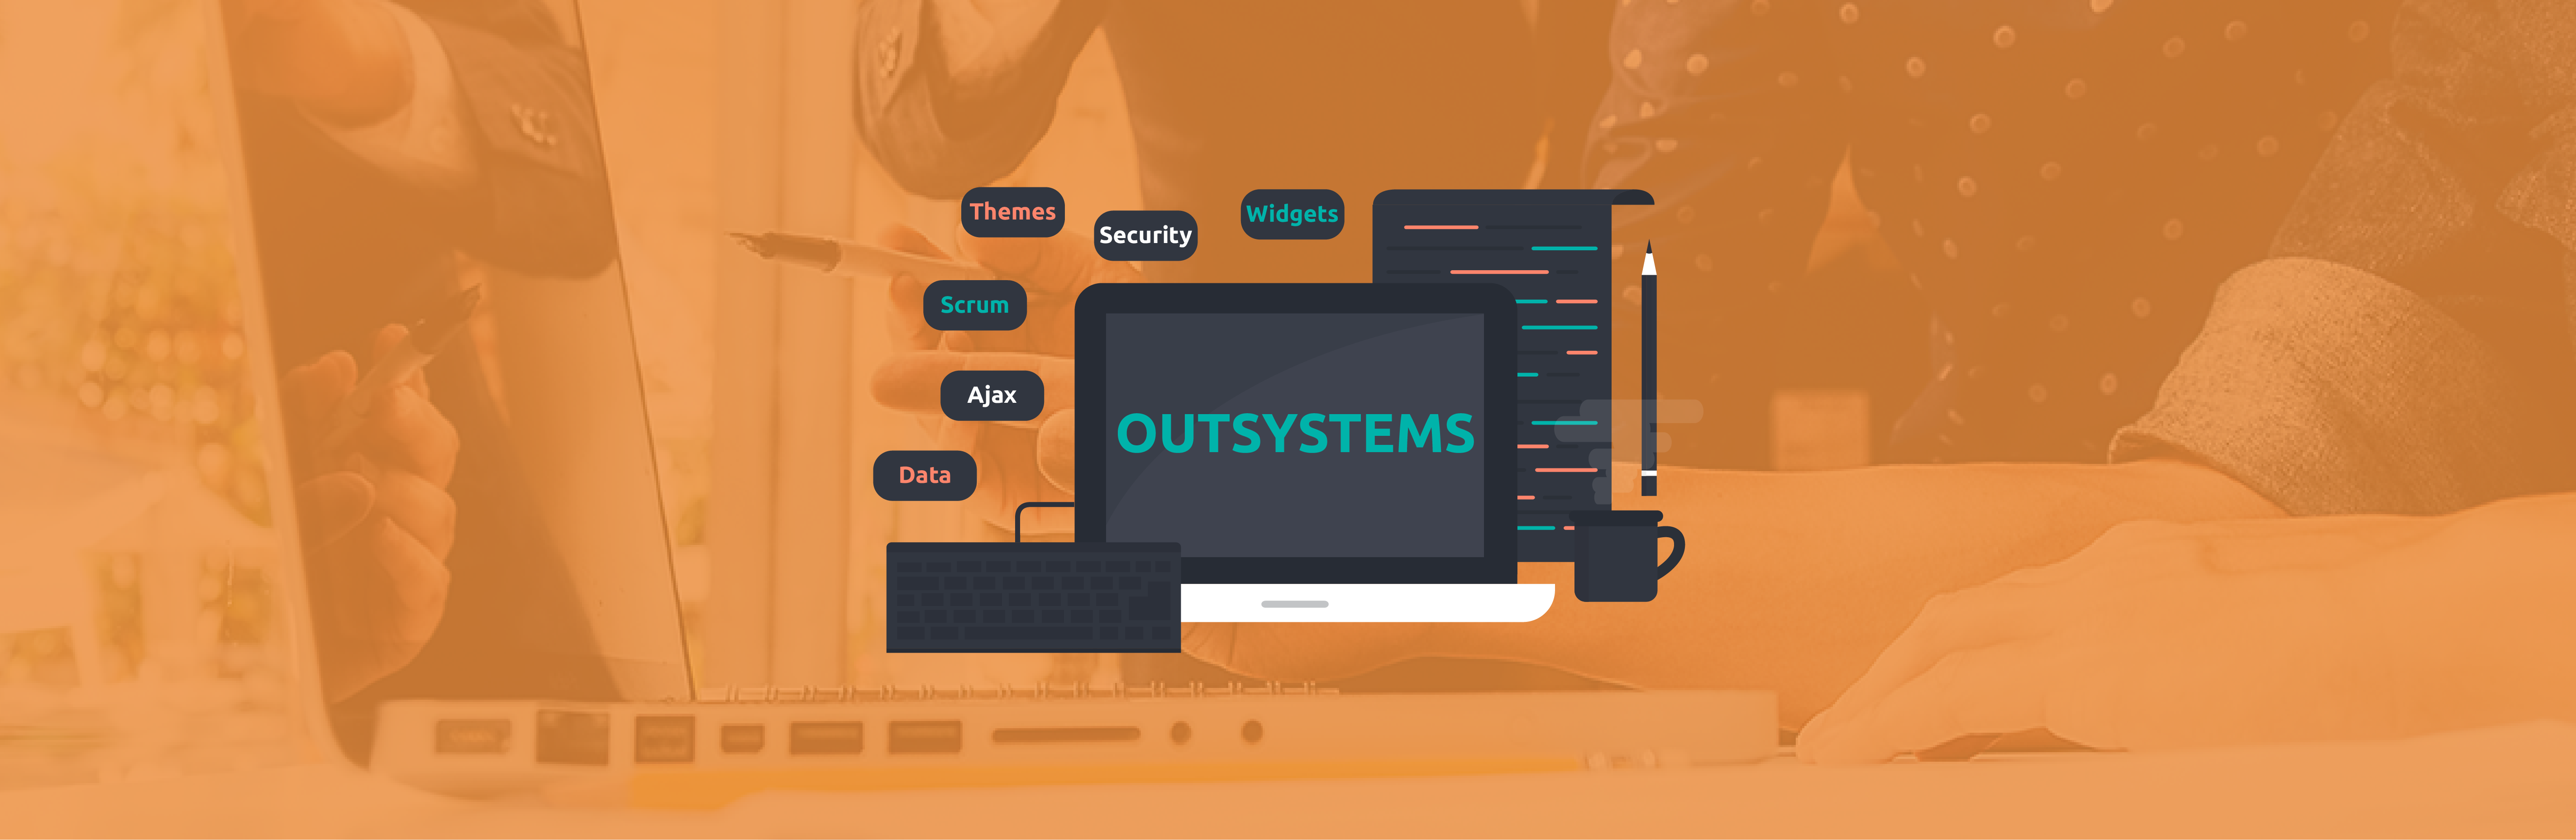 outsystems training